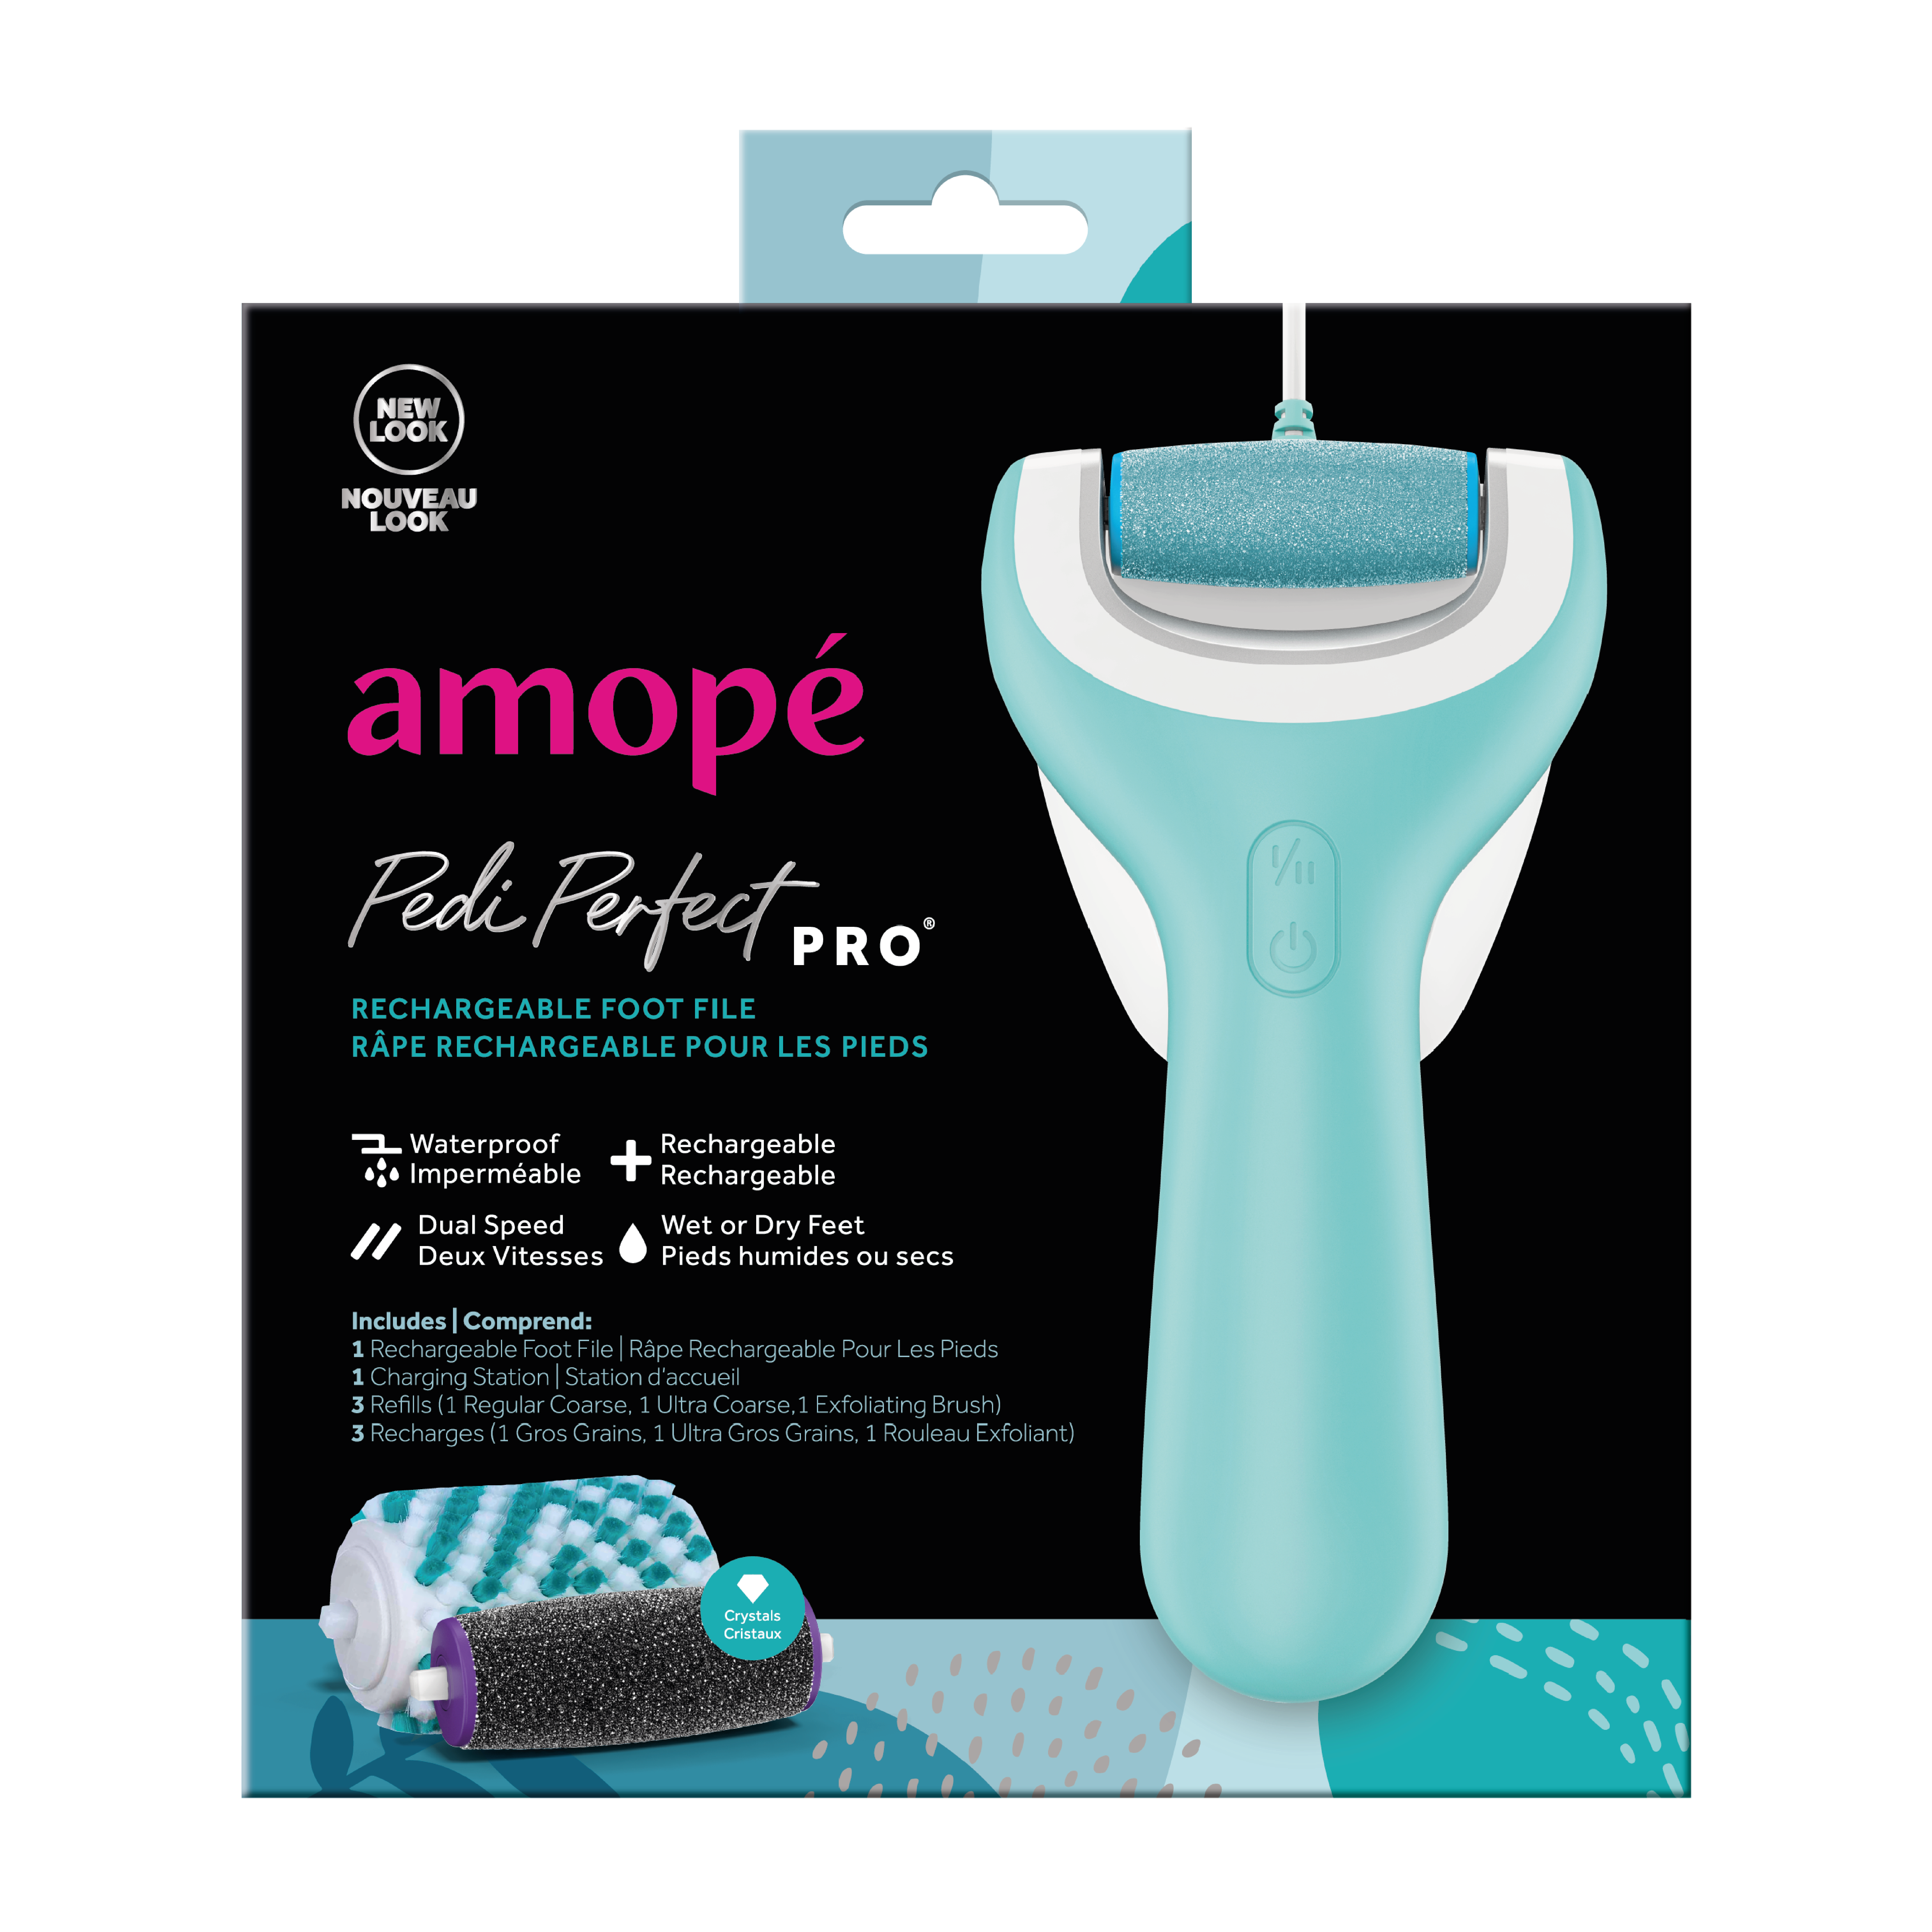 Amope Pedi Perfect Pro Rechargeable Foot File for Feet, Hard and Dead Skin - image 1 of 11